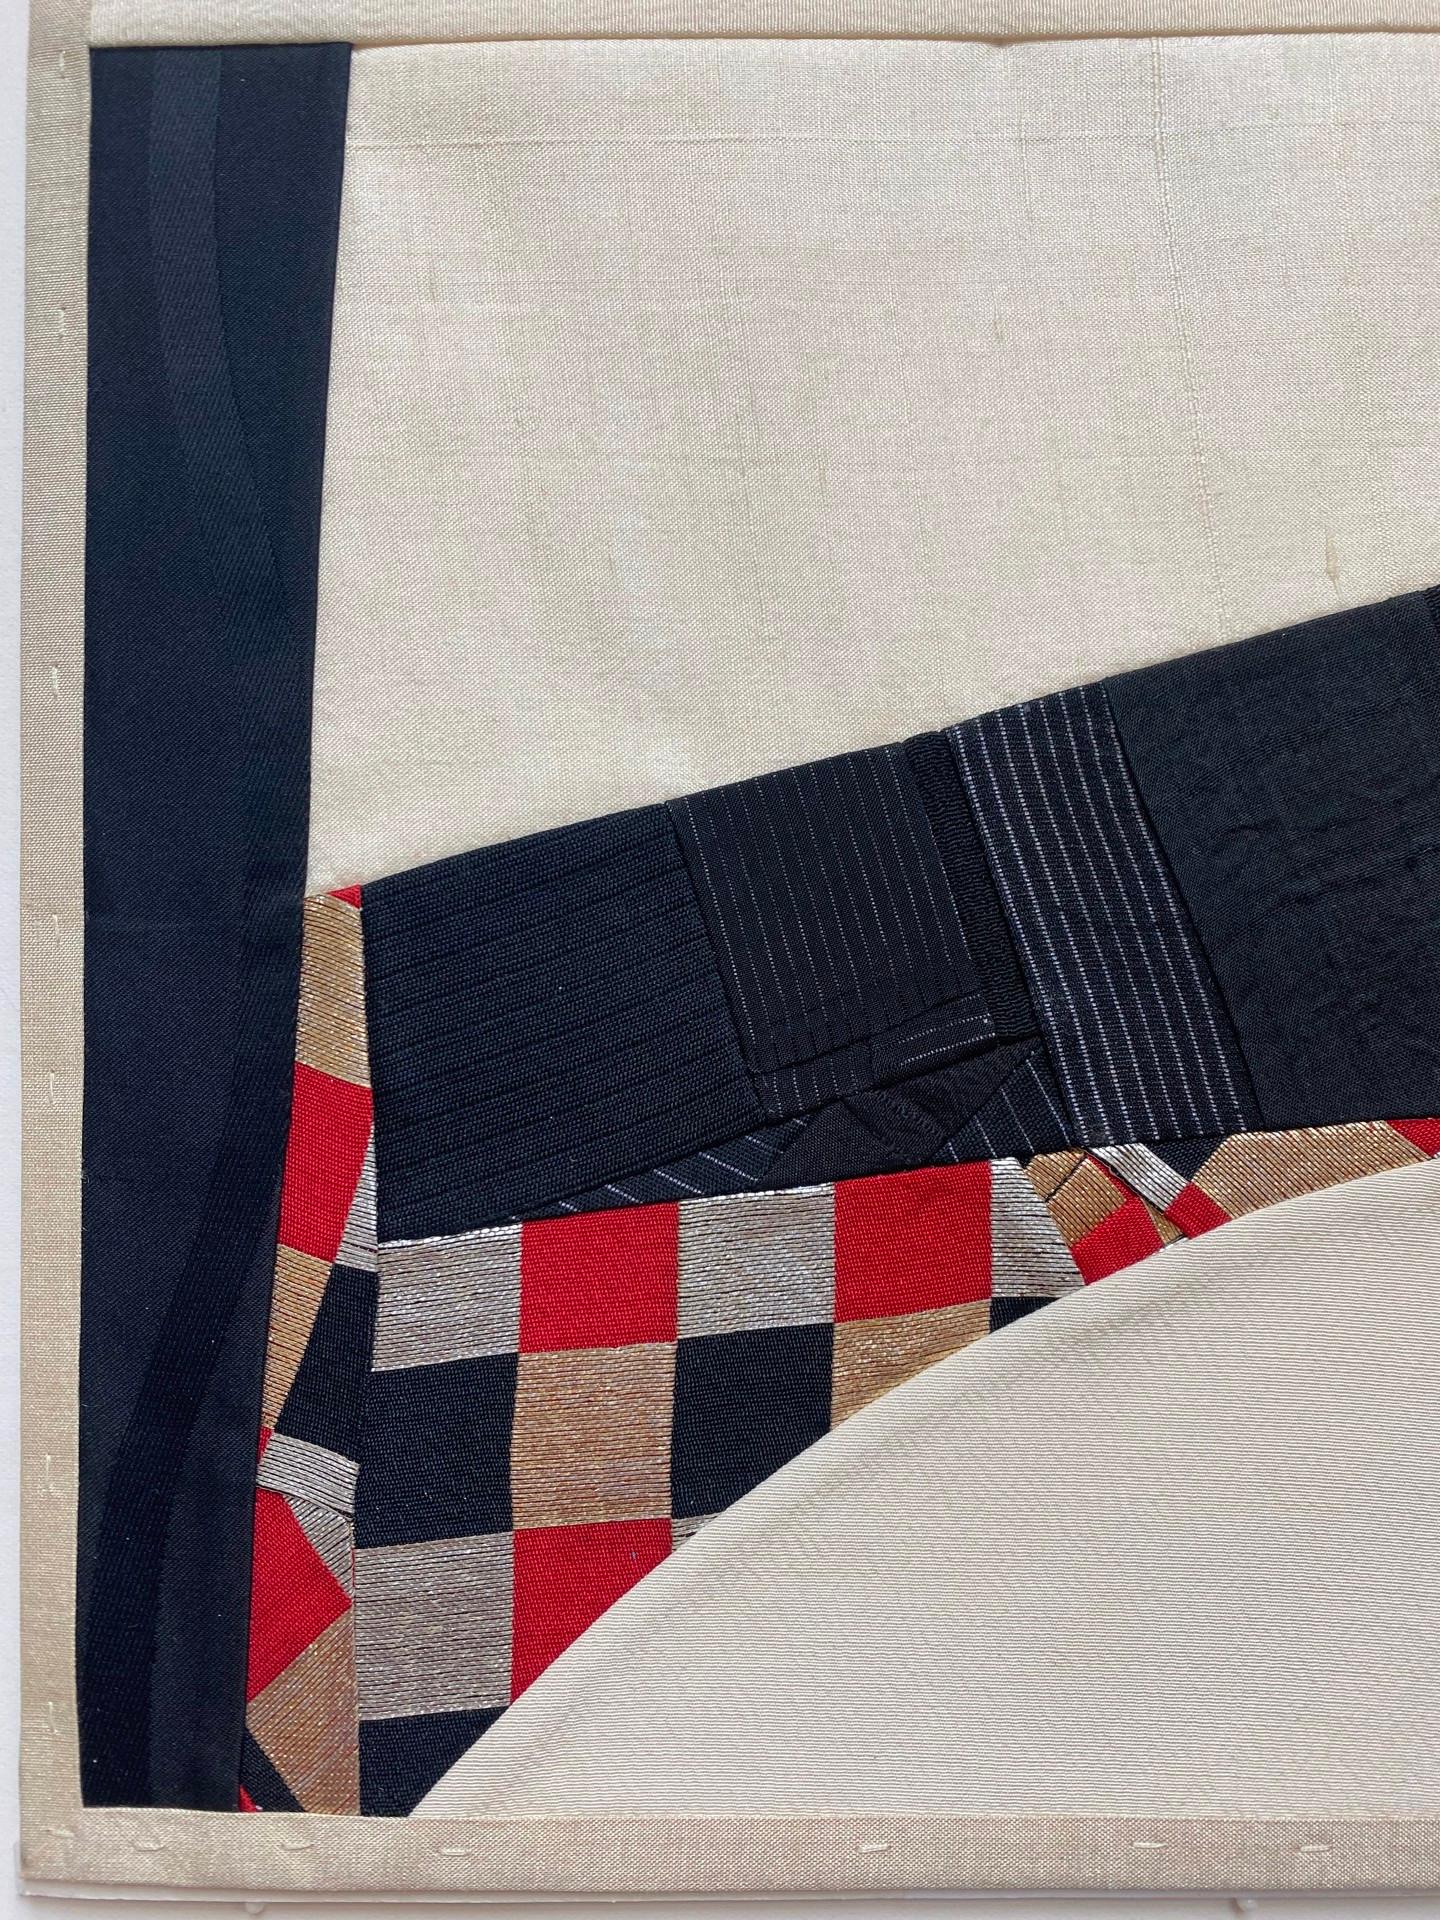 Debra Smith's fabric collages are like snippets of contemporary quilts. She recycles fabrics, such as the silk linings of antique Japanese kimonos used to make much of her current body of work. The silks are different shades of neutral and lend a